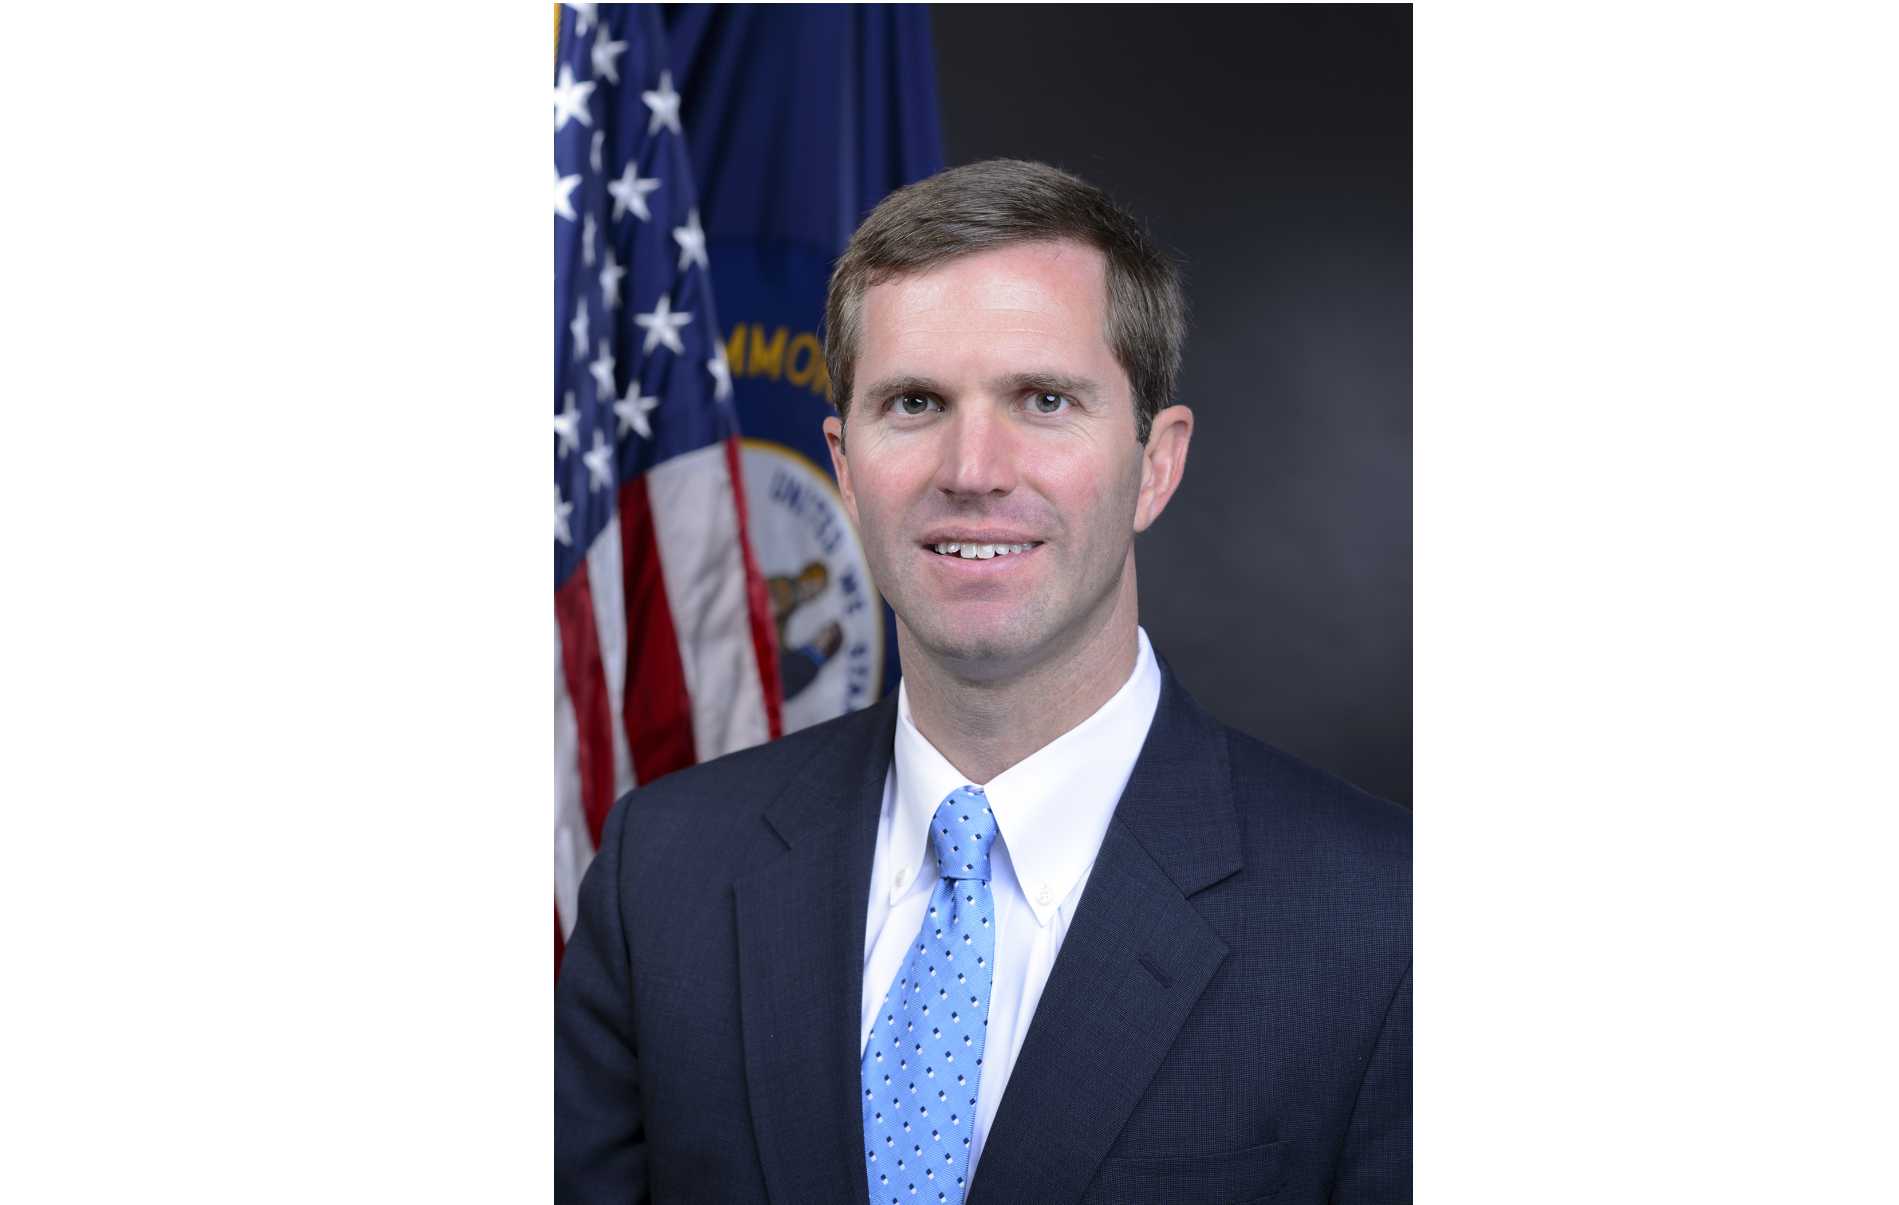 Official headshot of Kentucky Attorney General Andy Beshear